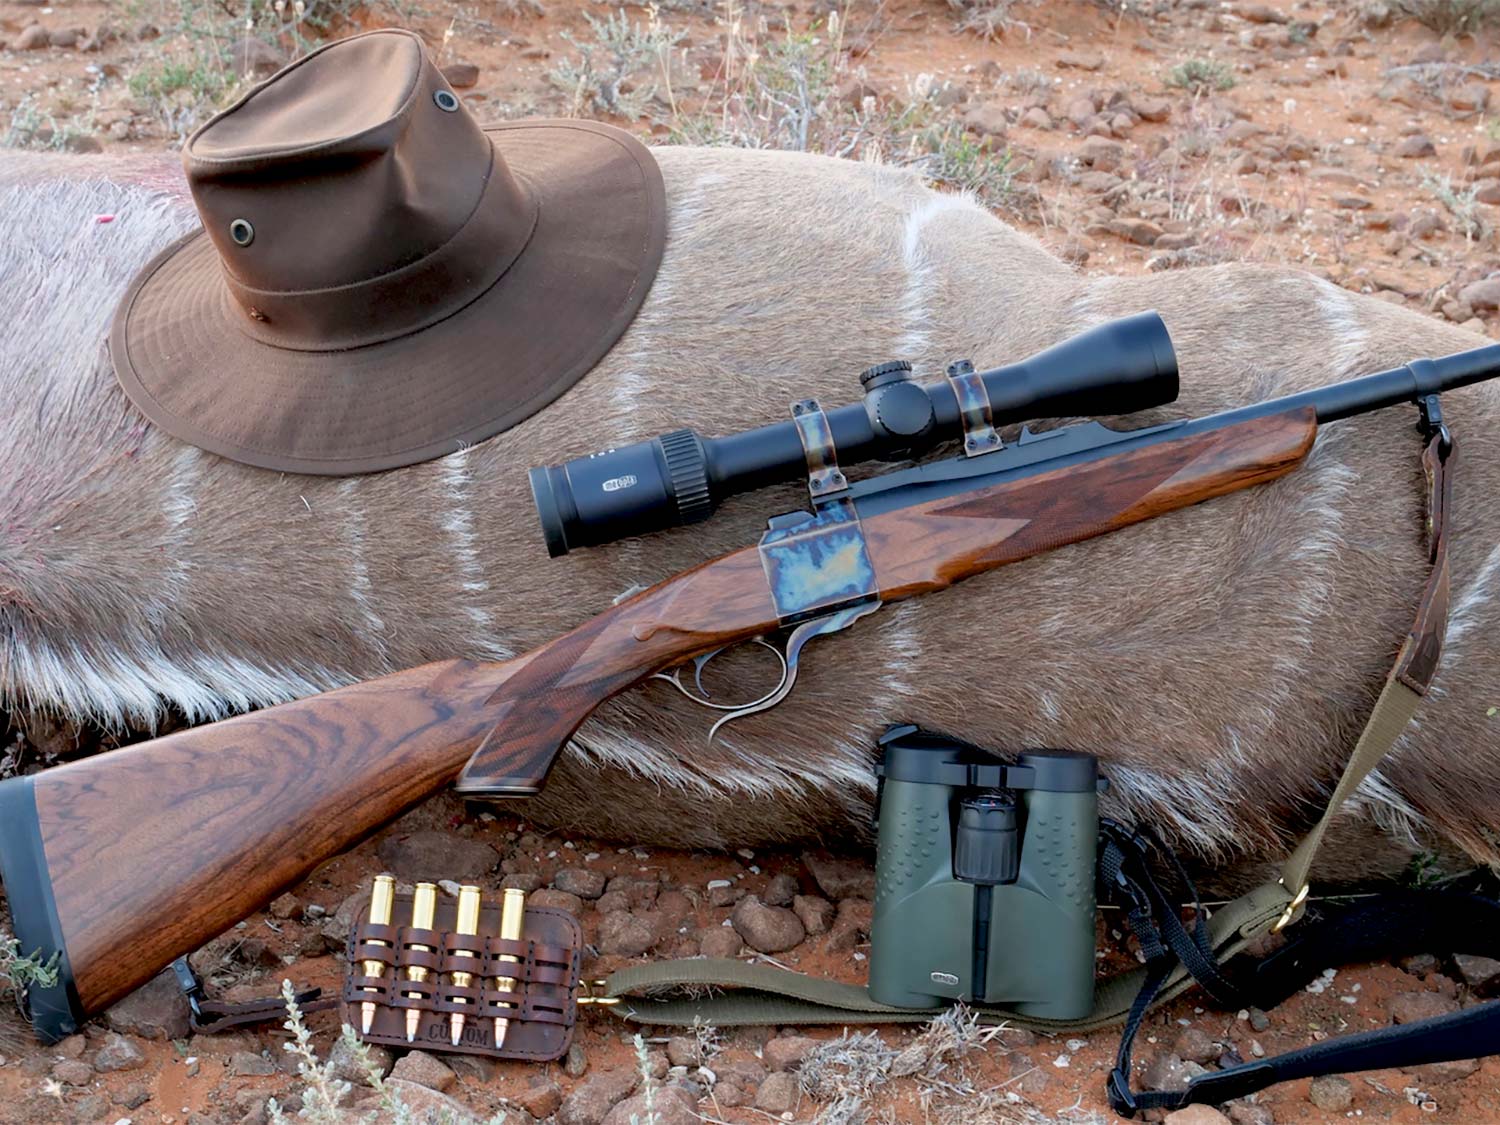 A setup of hunting rifles, ammo, and hunting gear next to down big game.